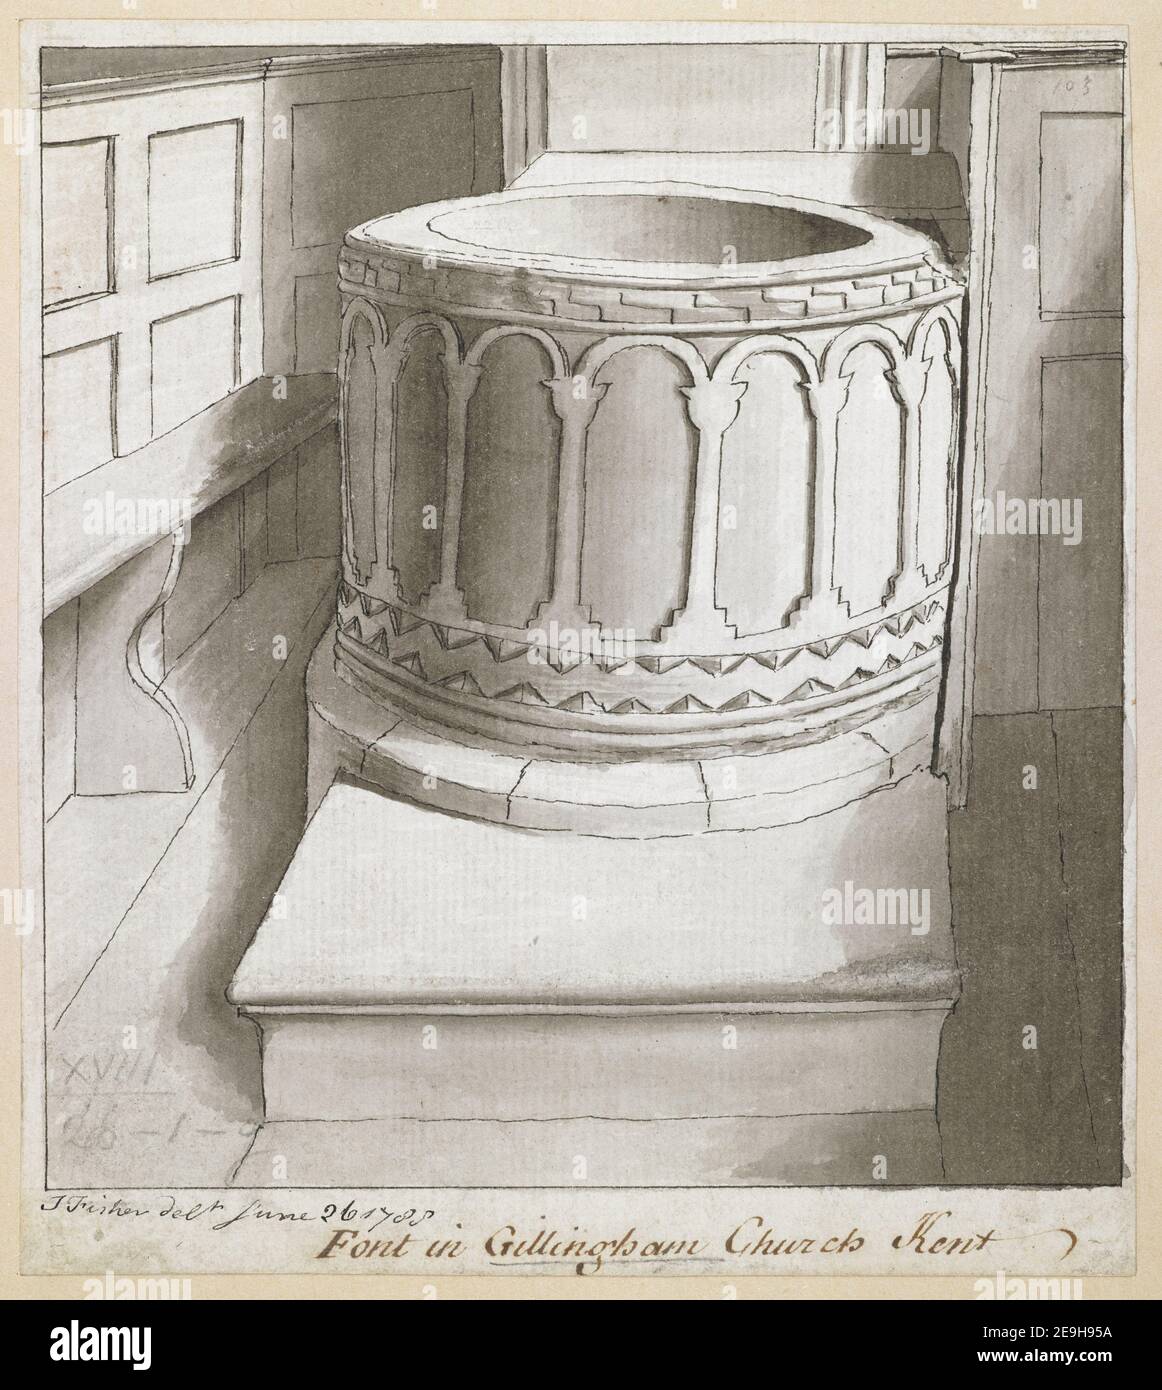 Font in Gillingham Church Kent.  Author  Fisher, Thomas 18.26.1.g. Date of publication: June 26 1788.  Item type: 1 drawing Medium: pen and black ink with monochrome wash Dimensions: sheet 16.5 x 14.7 cm  Former owner: George III, King of Great Britain, 1738-1820 Stock Photo